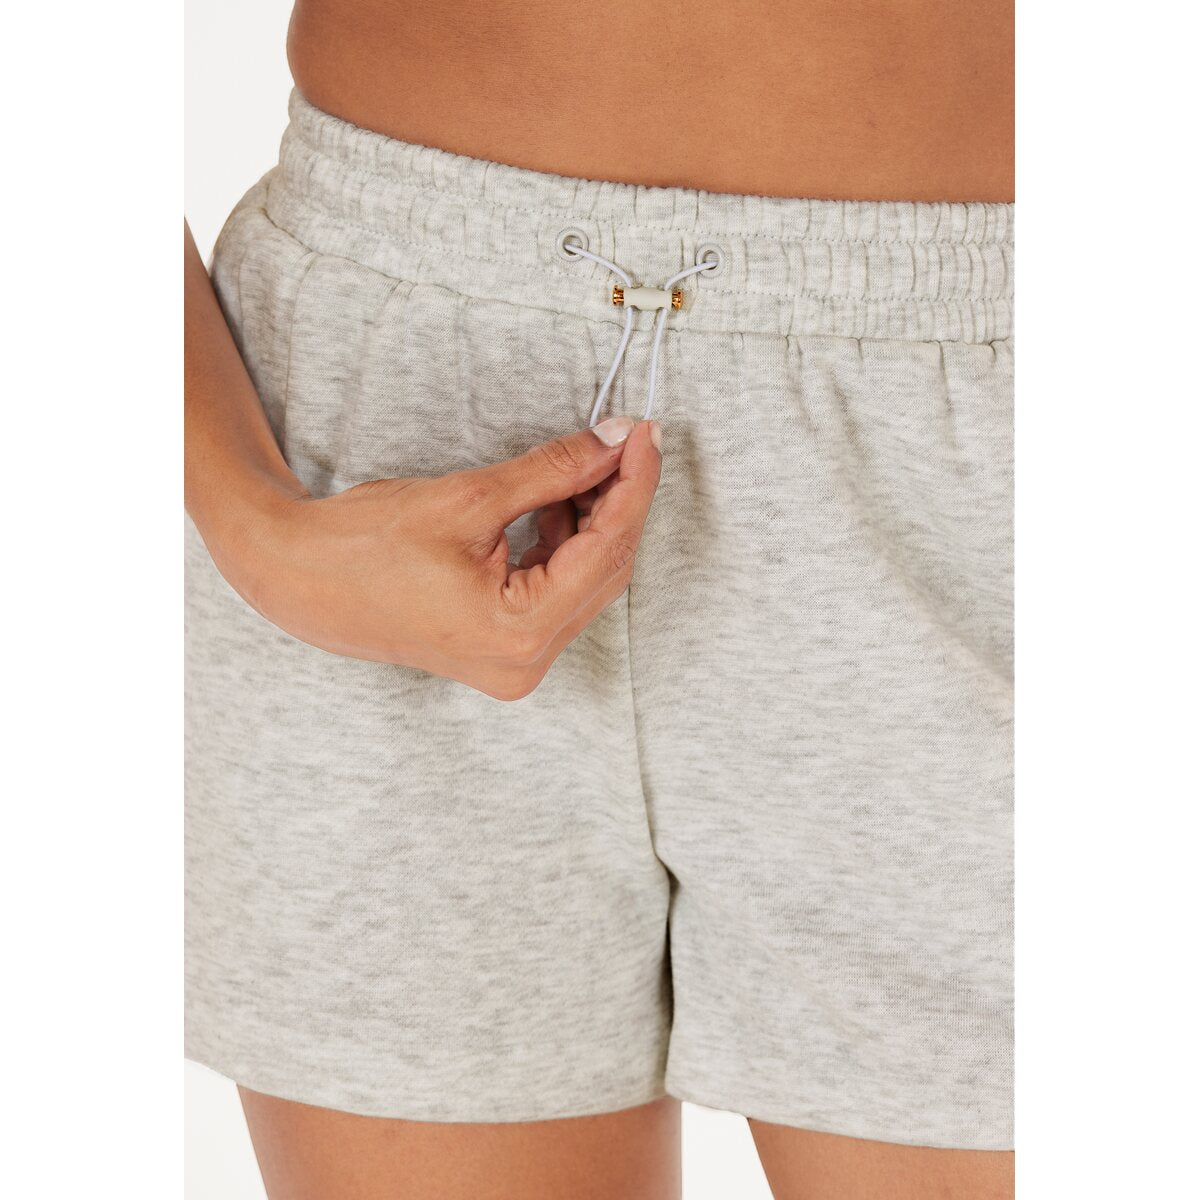 Athlecia Ruthie Womenswear Shorts 3 Shaws Department Stores